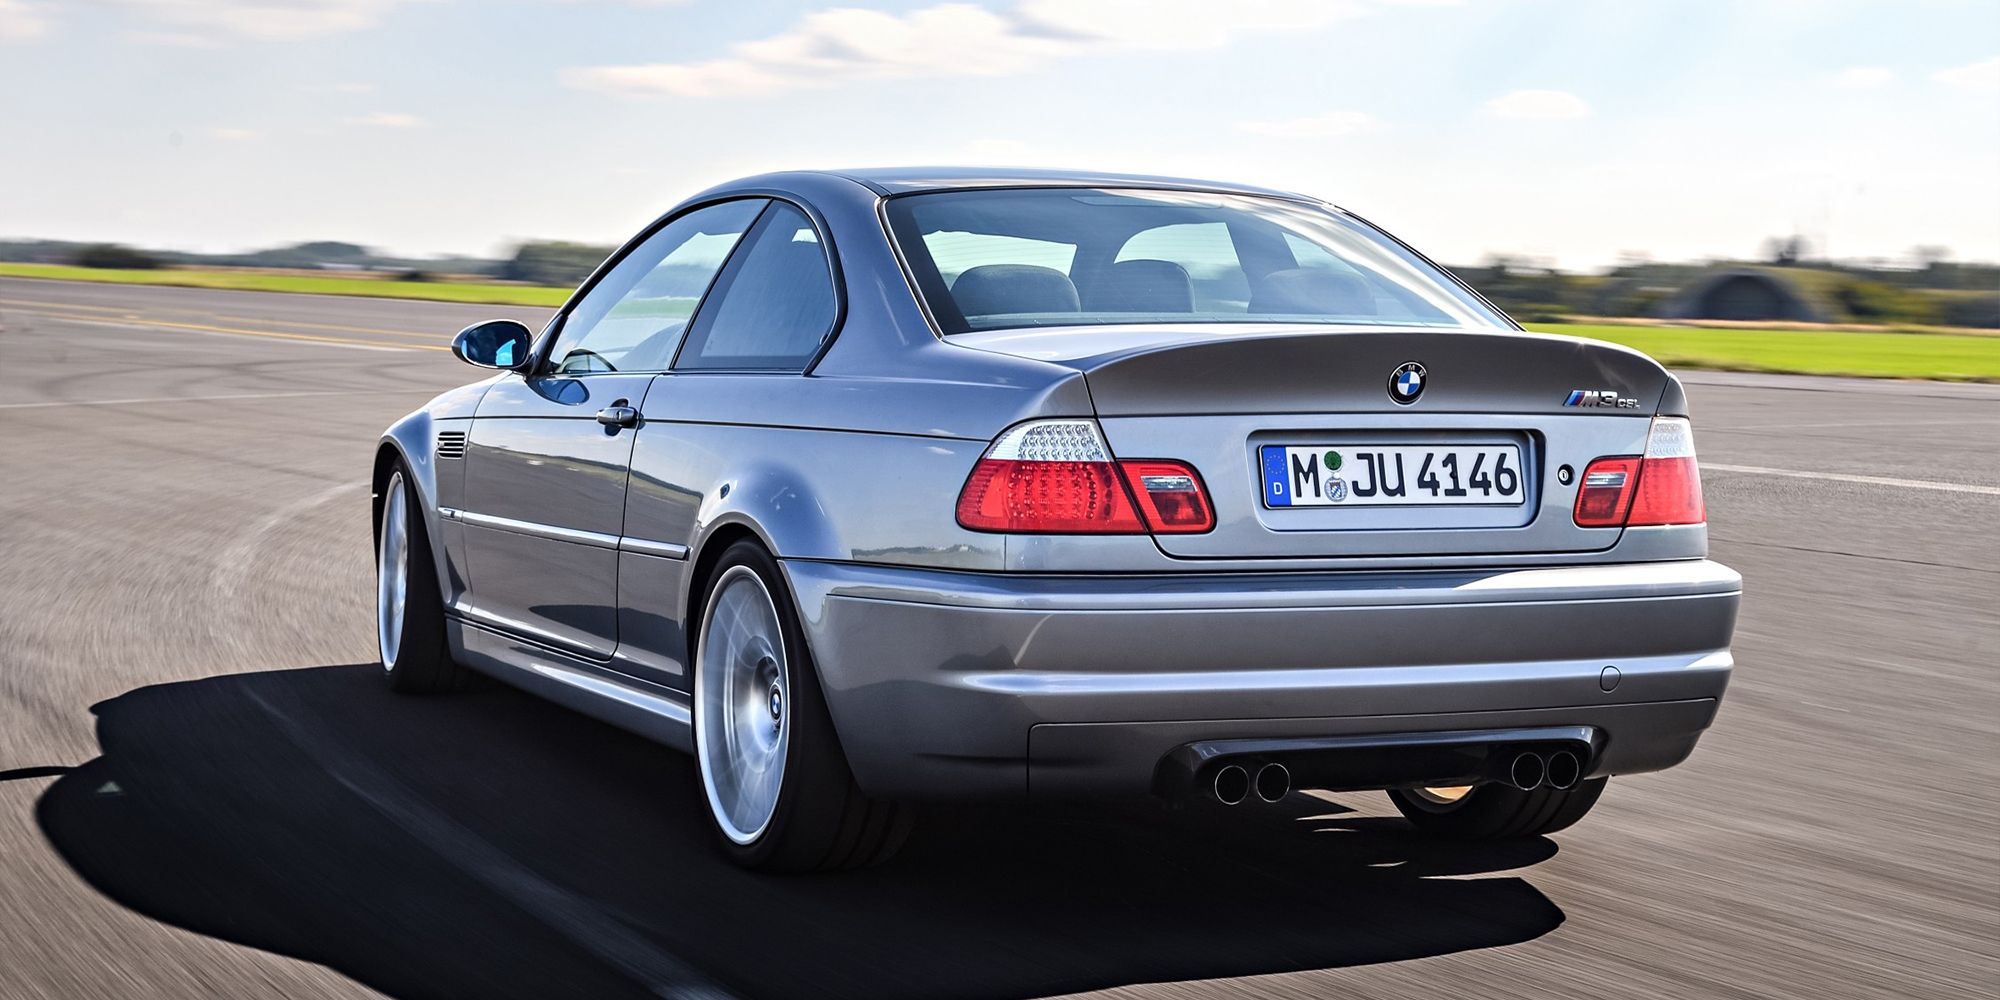 The rear of the M3 CSL